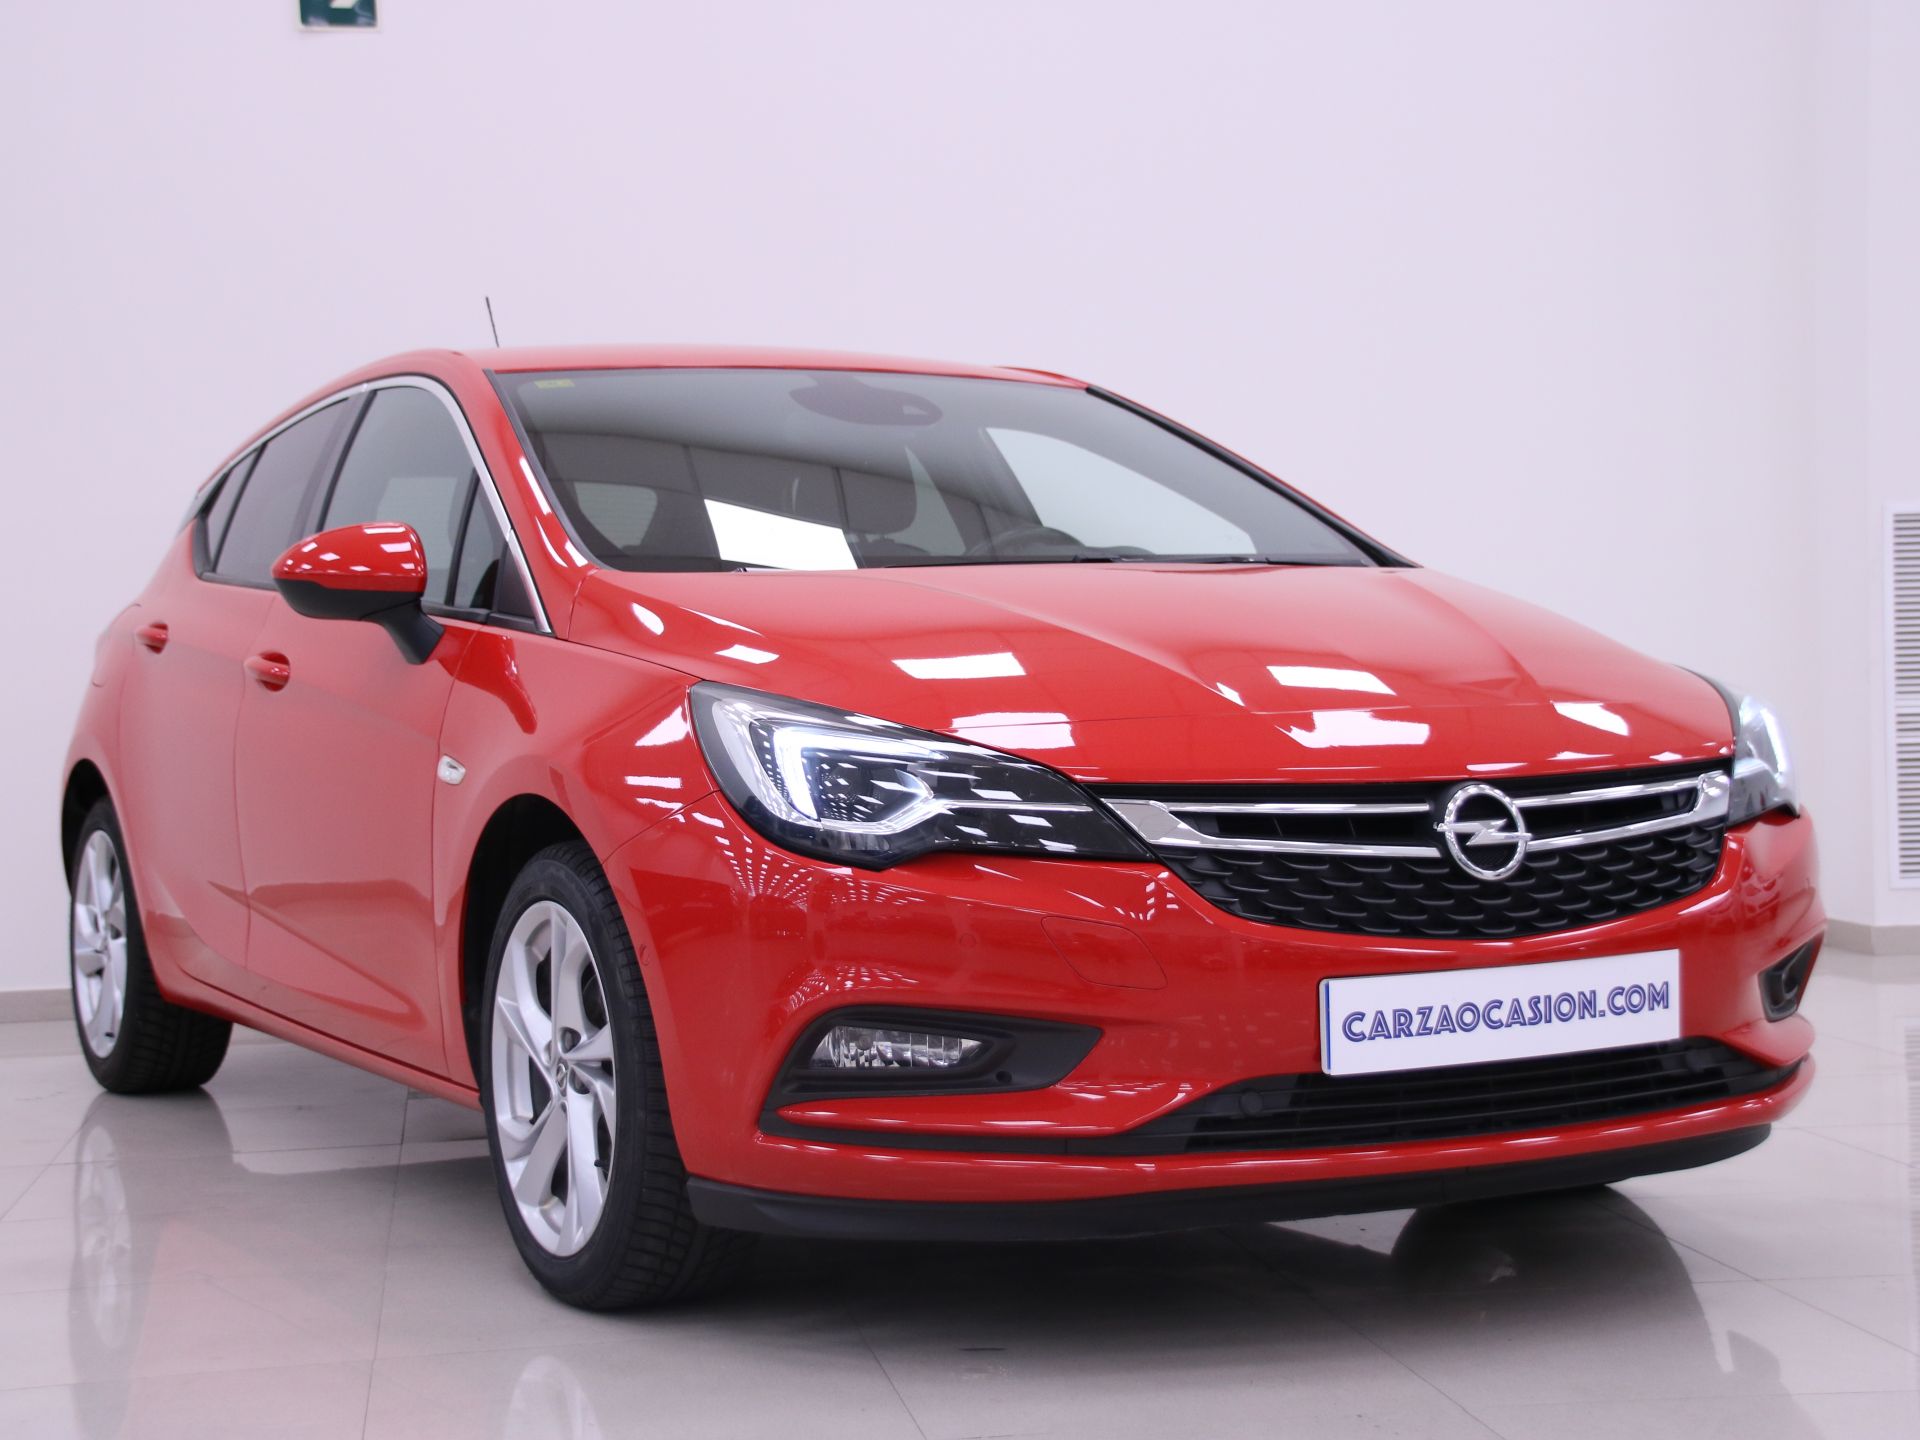 Opel Astra 1.4 Turbo S/S 92kW (125CV) Excellence